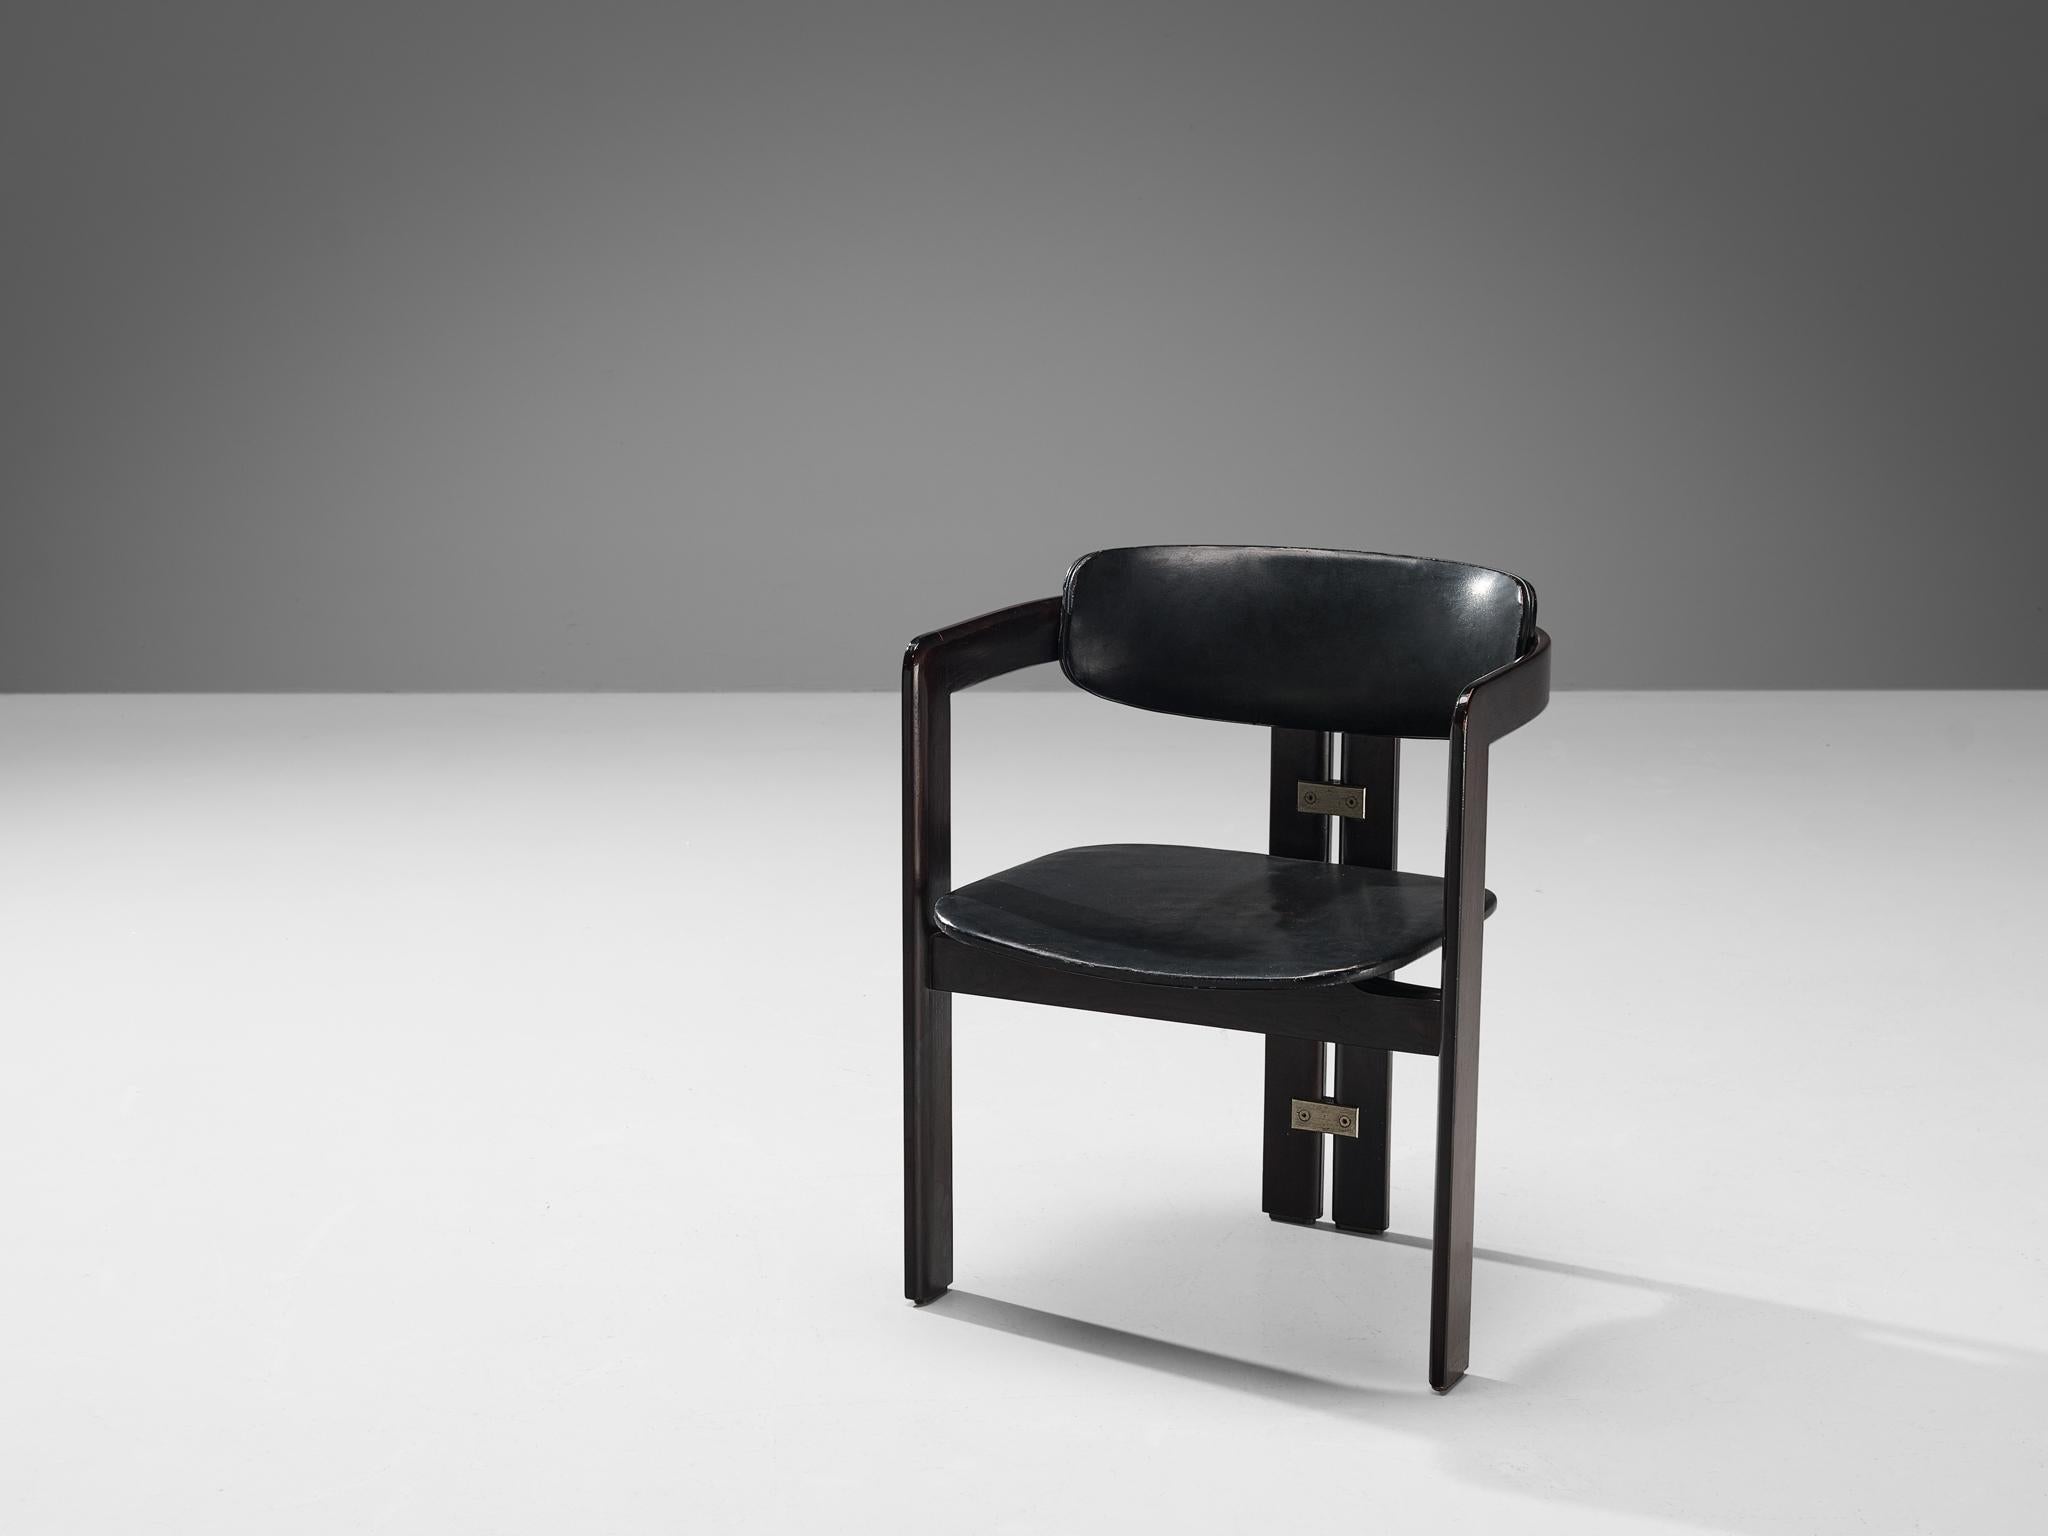 Augusto Savini for Pozzi, 'Pamplona' dining chair, lacquered wood, fabric, aluminum, Italy, 1965

The Pamplona armchair features a sleek black lacquered wooden frame and is upholstered in black leather for both the seat and backrest. Designed by